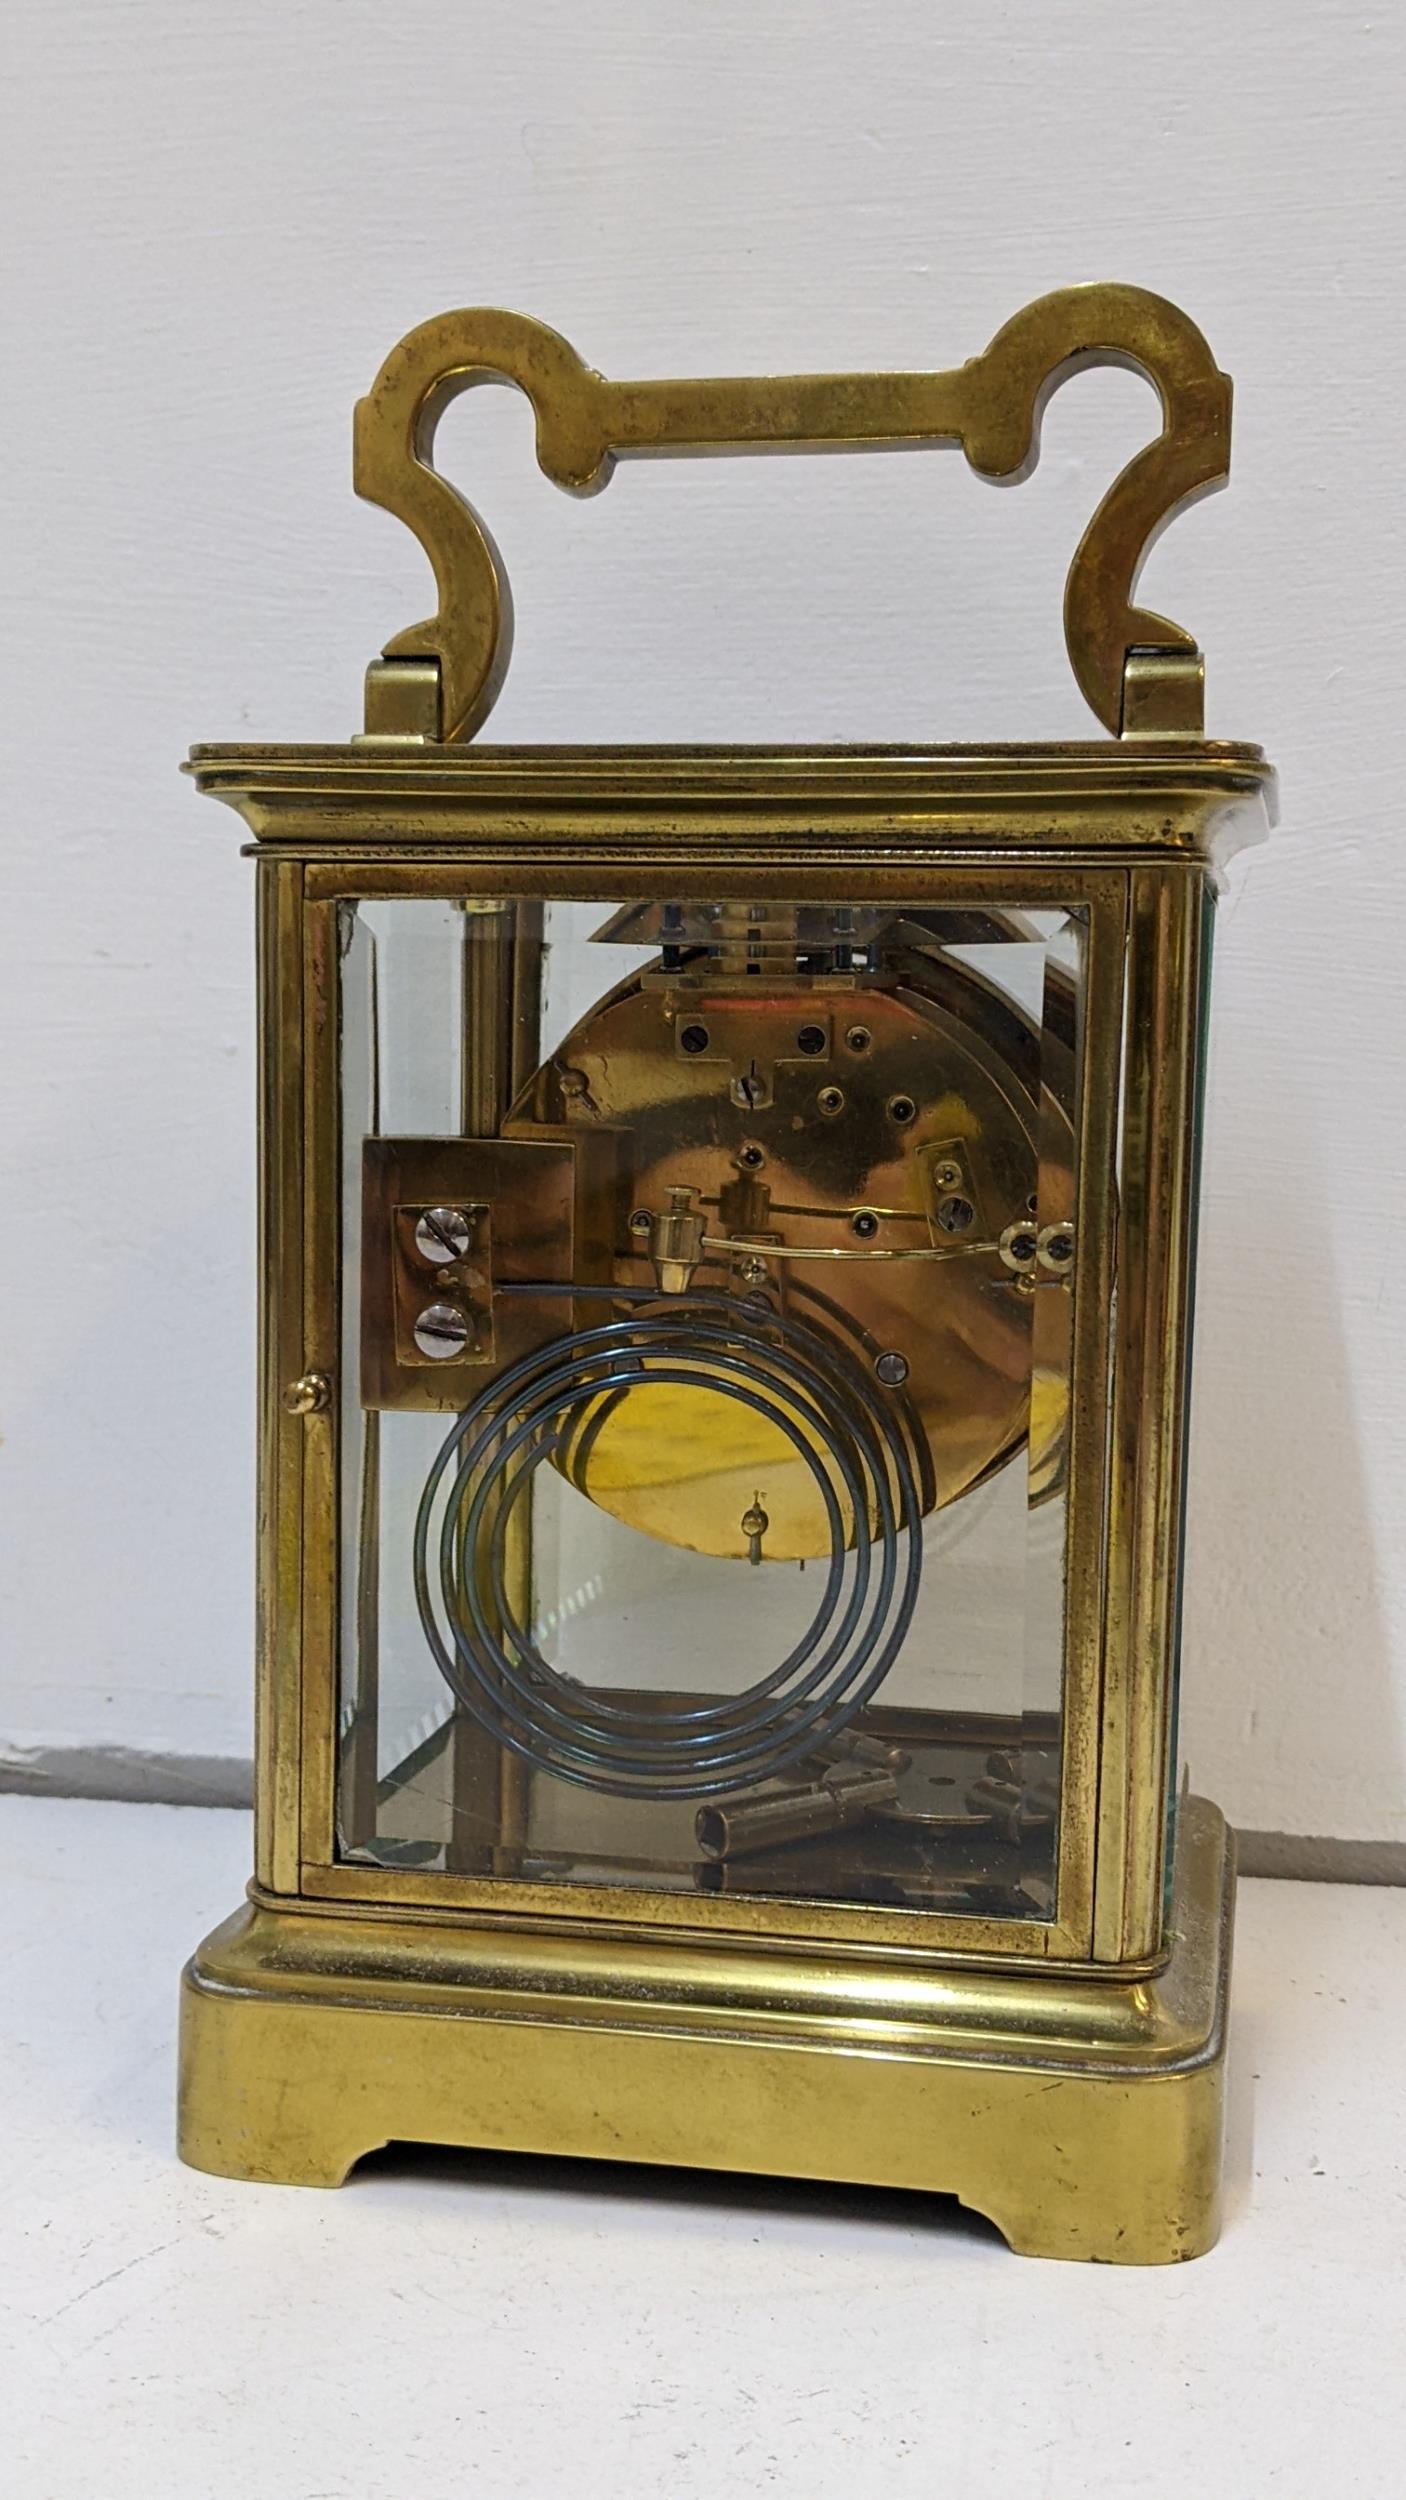 A large early 20th century brass cased carriage style clock with a painted dial and gong strike - Image 3 of 3